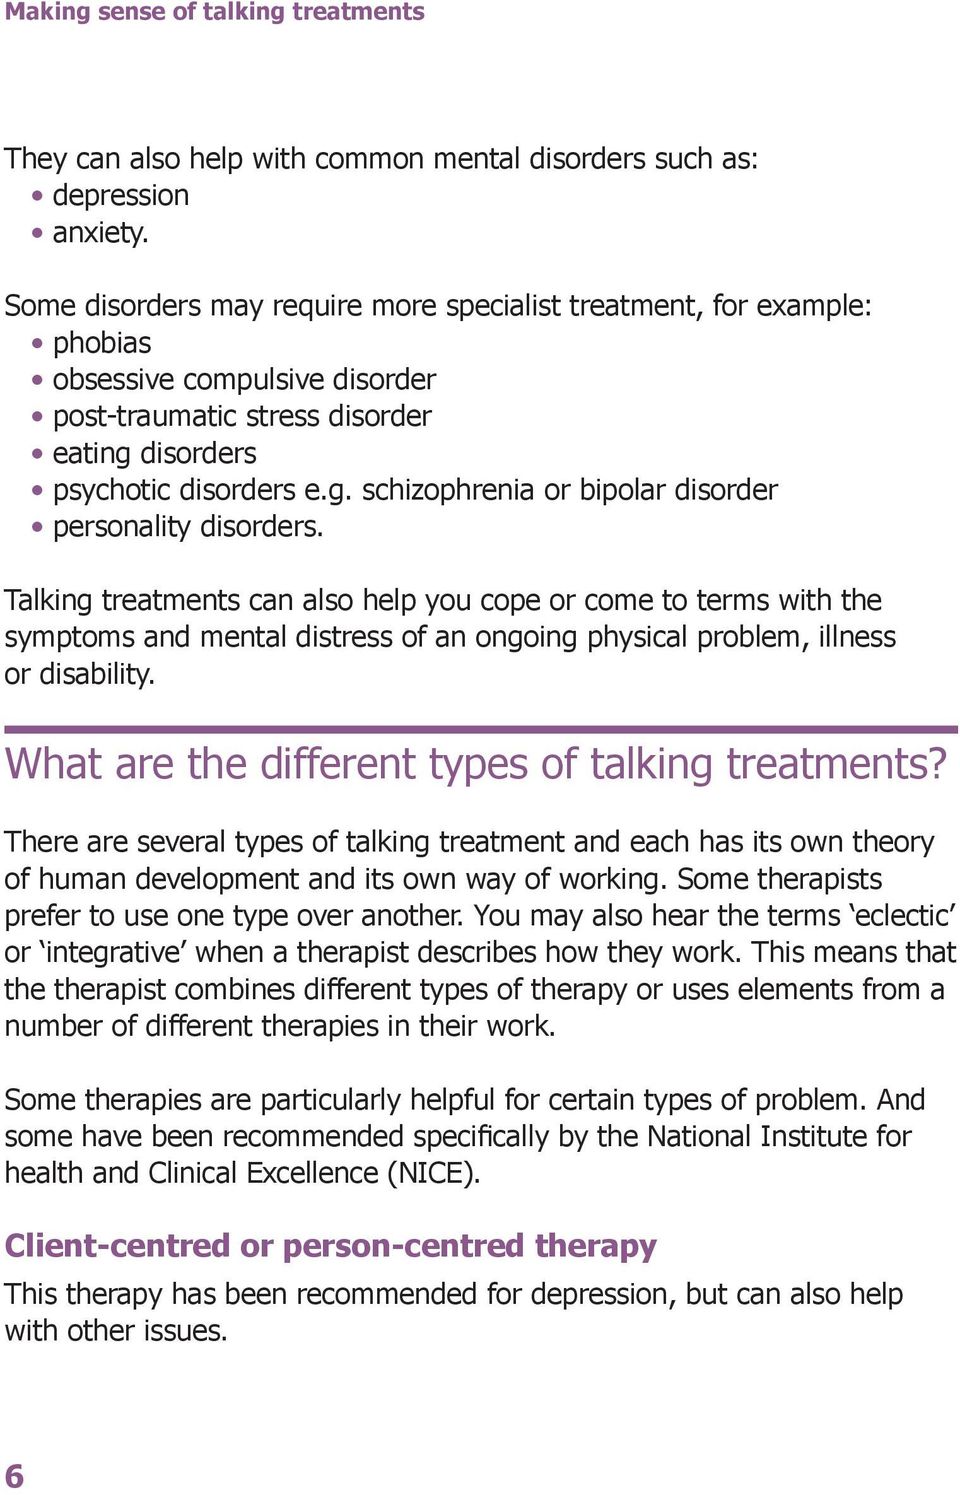 Talking treatments can also help you cope or come to terms with the symptoms and mental distress of an ongoing physical problem, illness or disability.